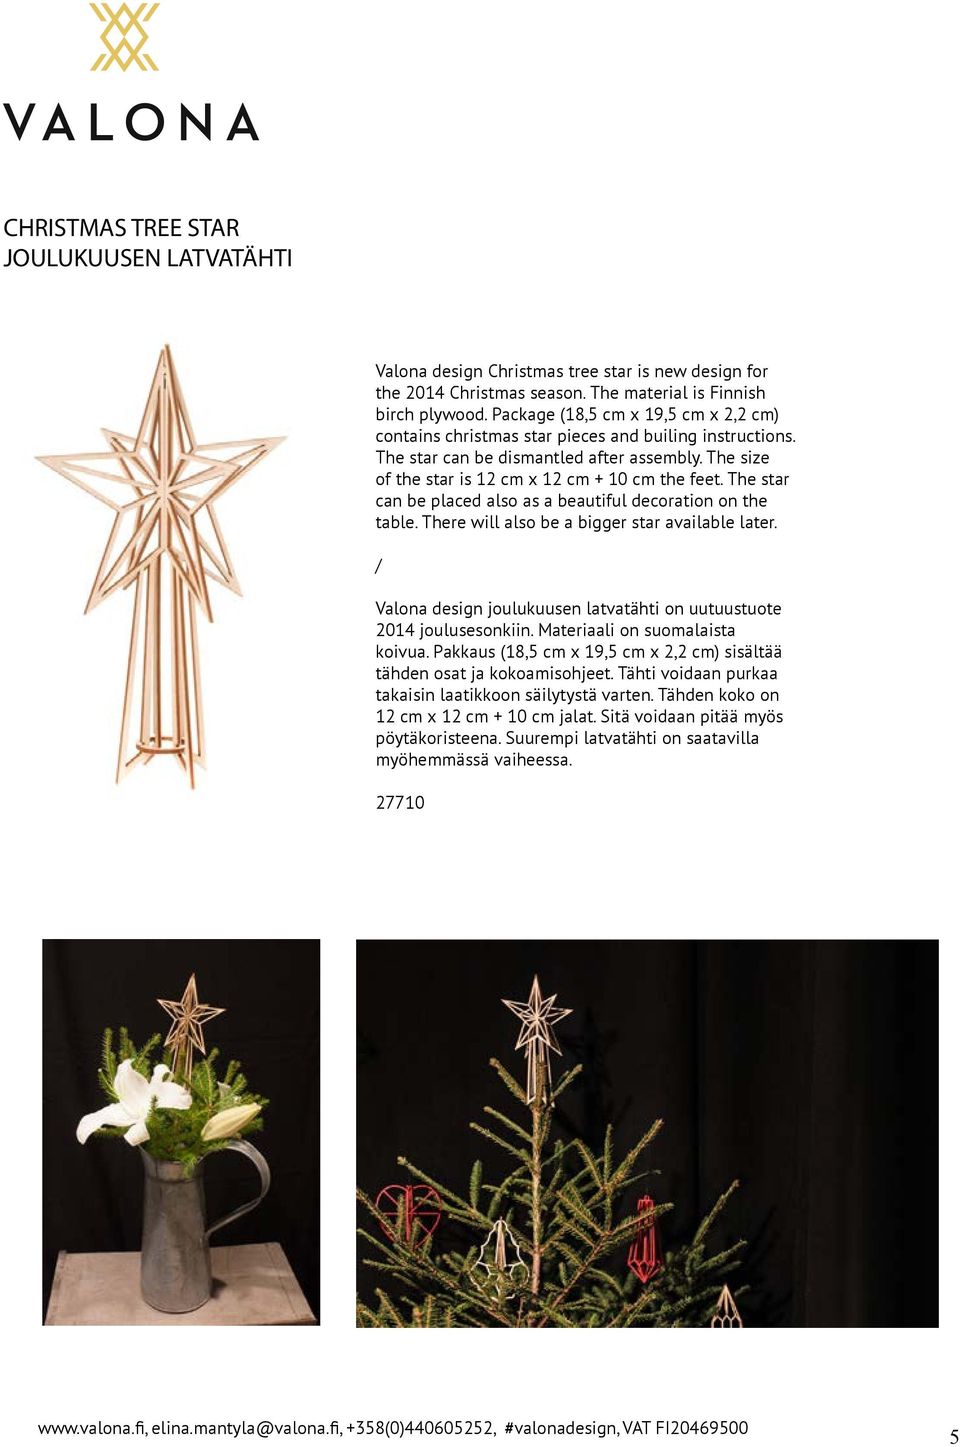 The star can be placed also as a beautiful decoration on the table. There will also be a bigger star available later. / Valona design joulukuusen latvatähti on uutuustuote 2014 joulusesonkiin.